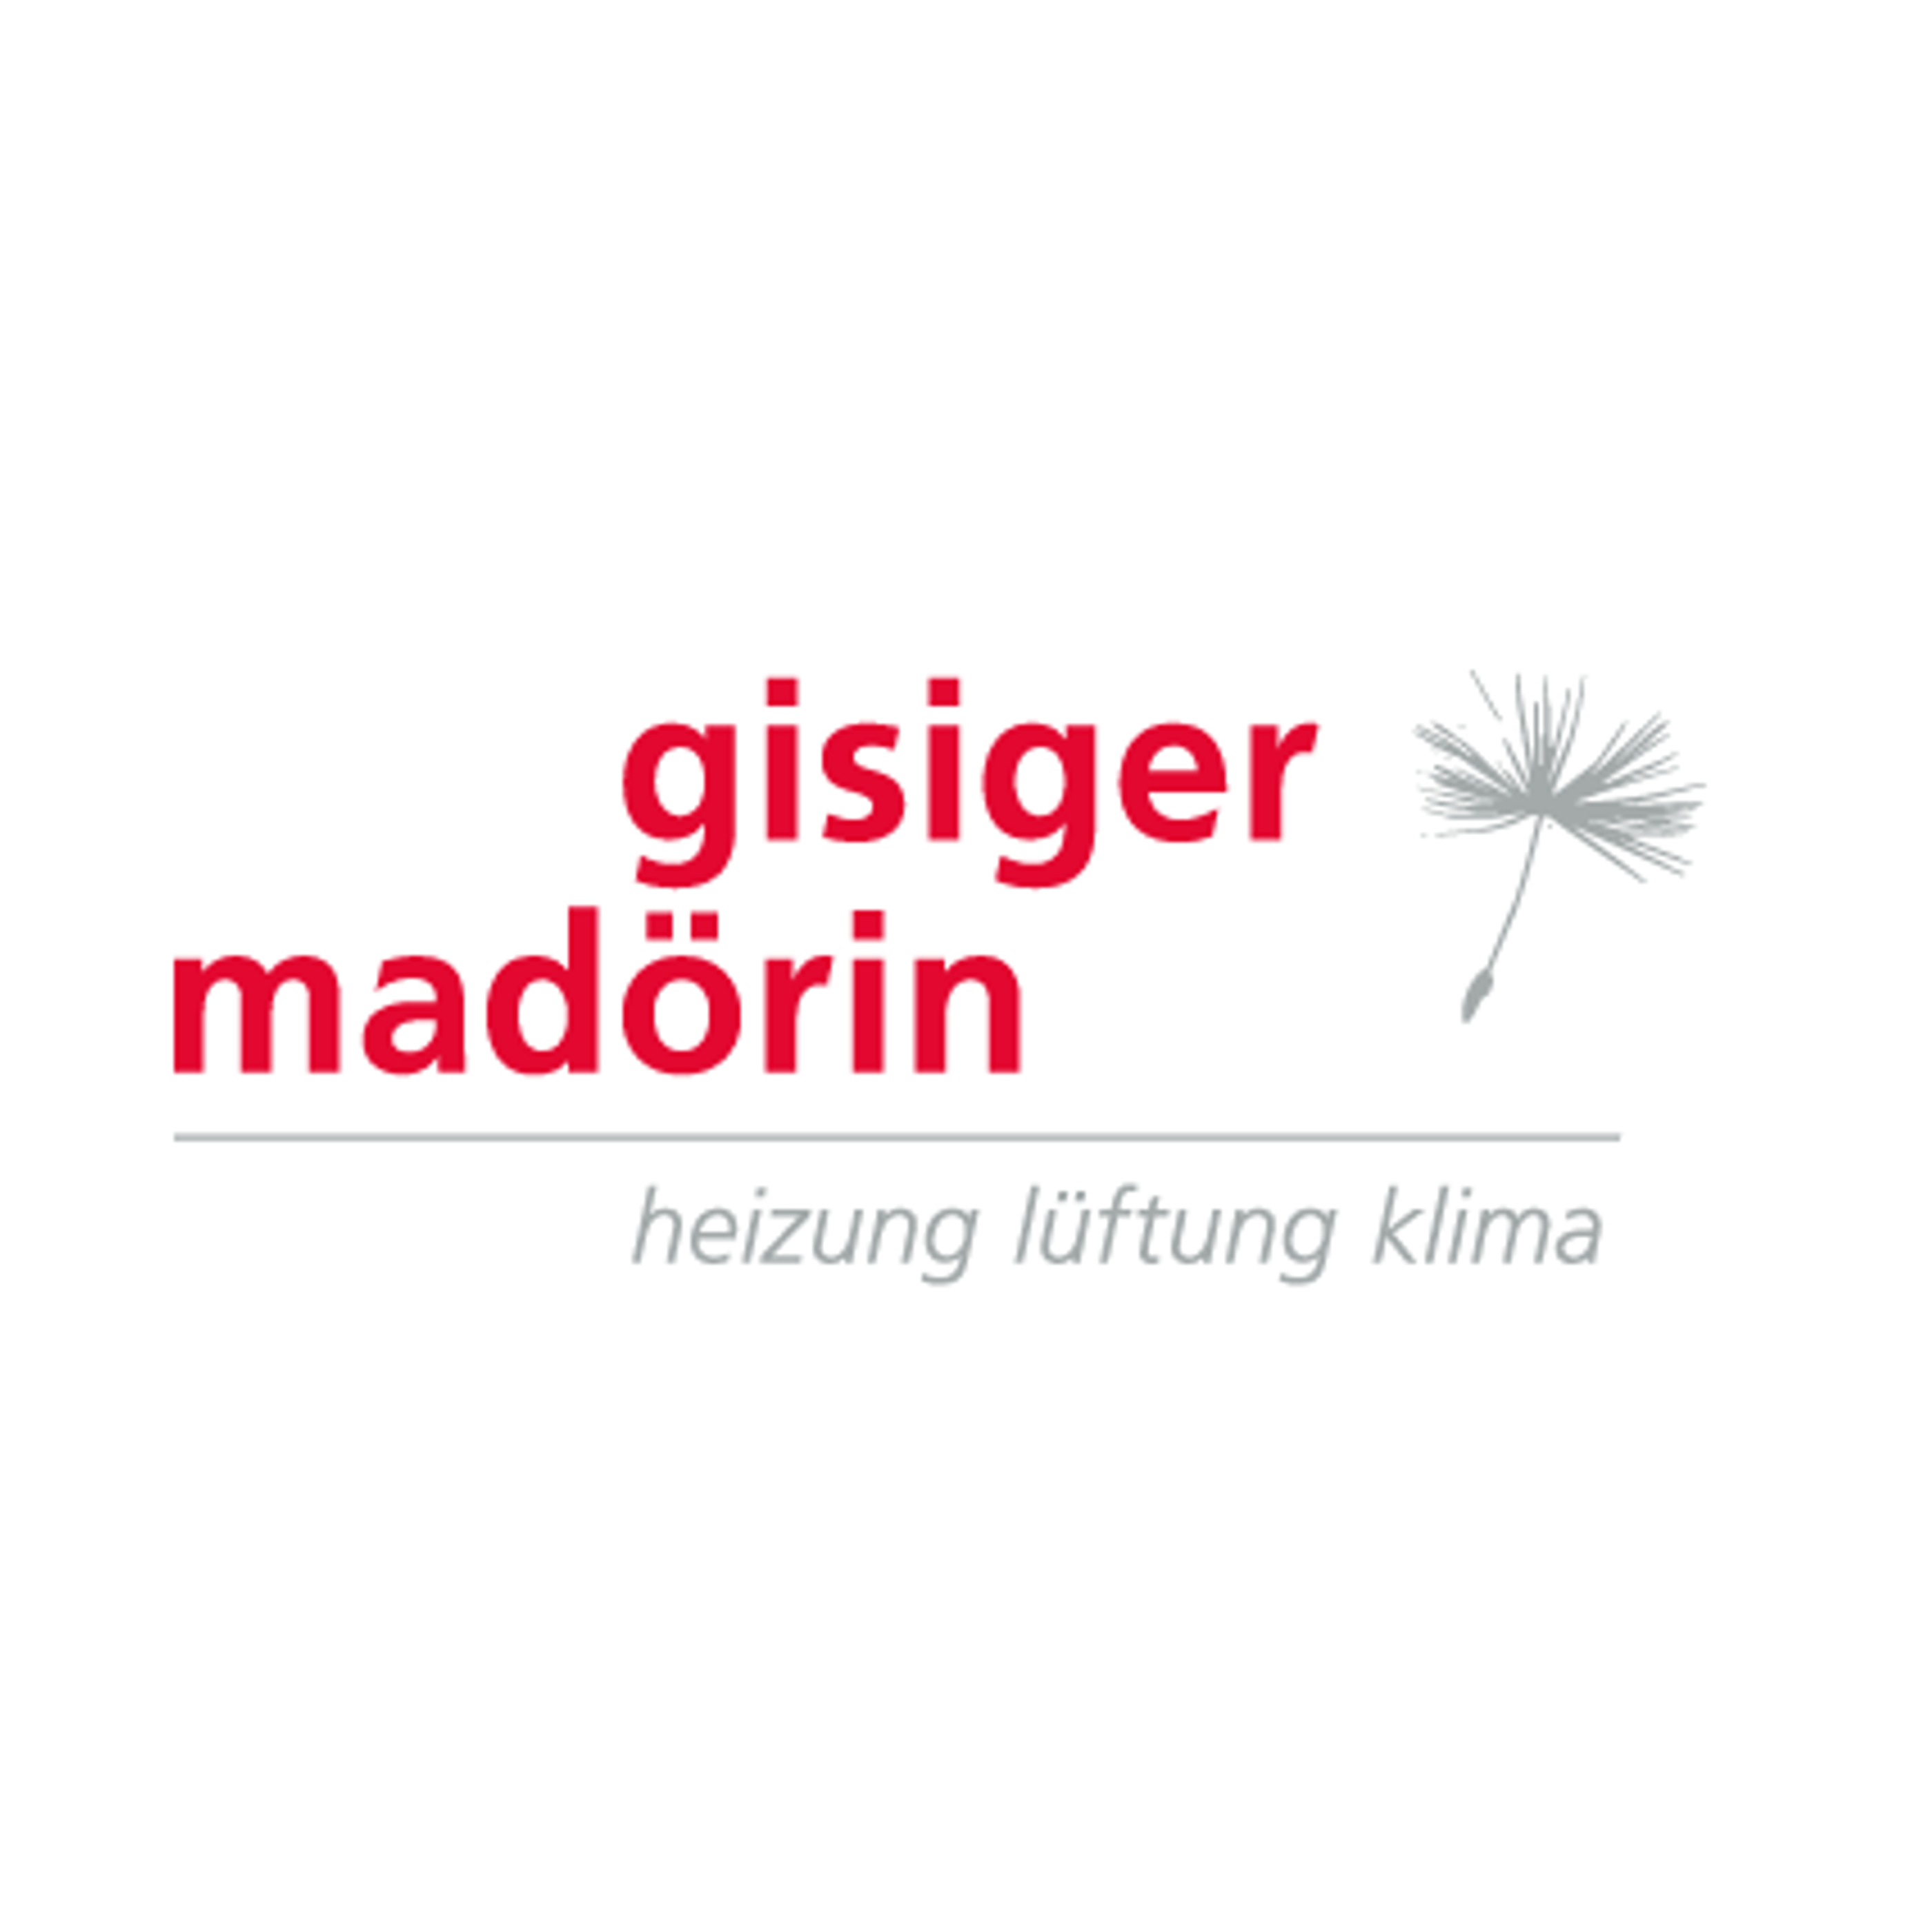 gisiger madörin ag - Hvac Contractor - Basel - 061 313 79 79 Switzerland | ShowMeLocal.com